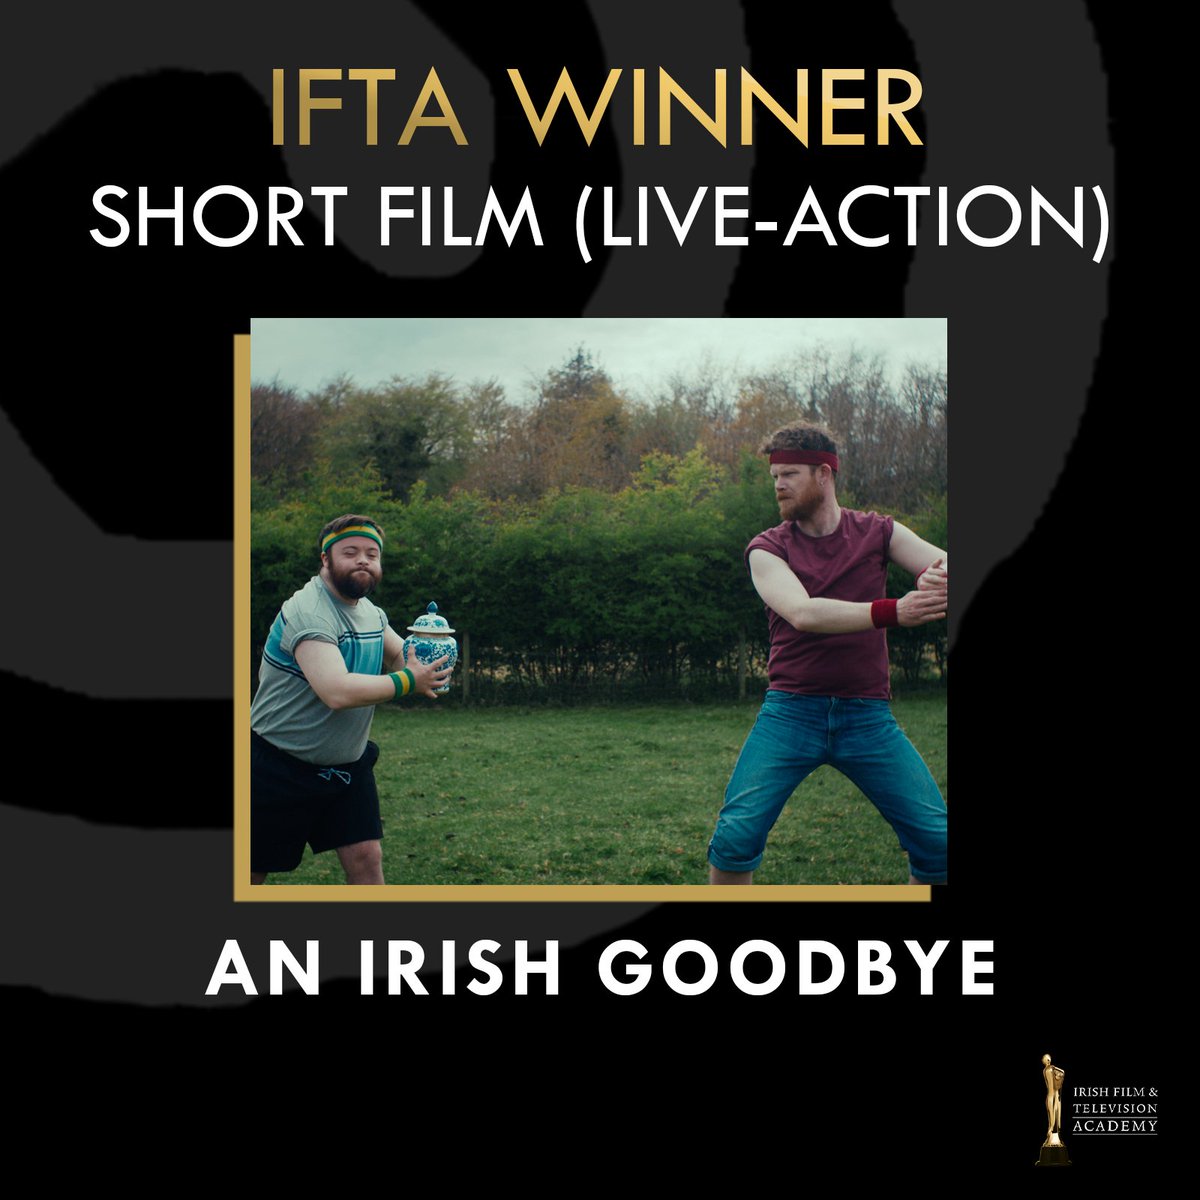 An Irish Goodbye wins the #IFTA for Best Live Action Short Film!